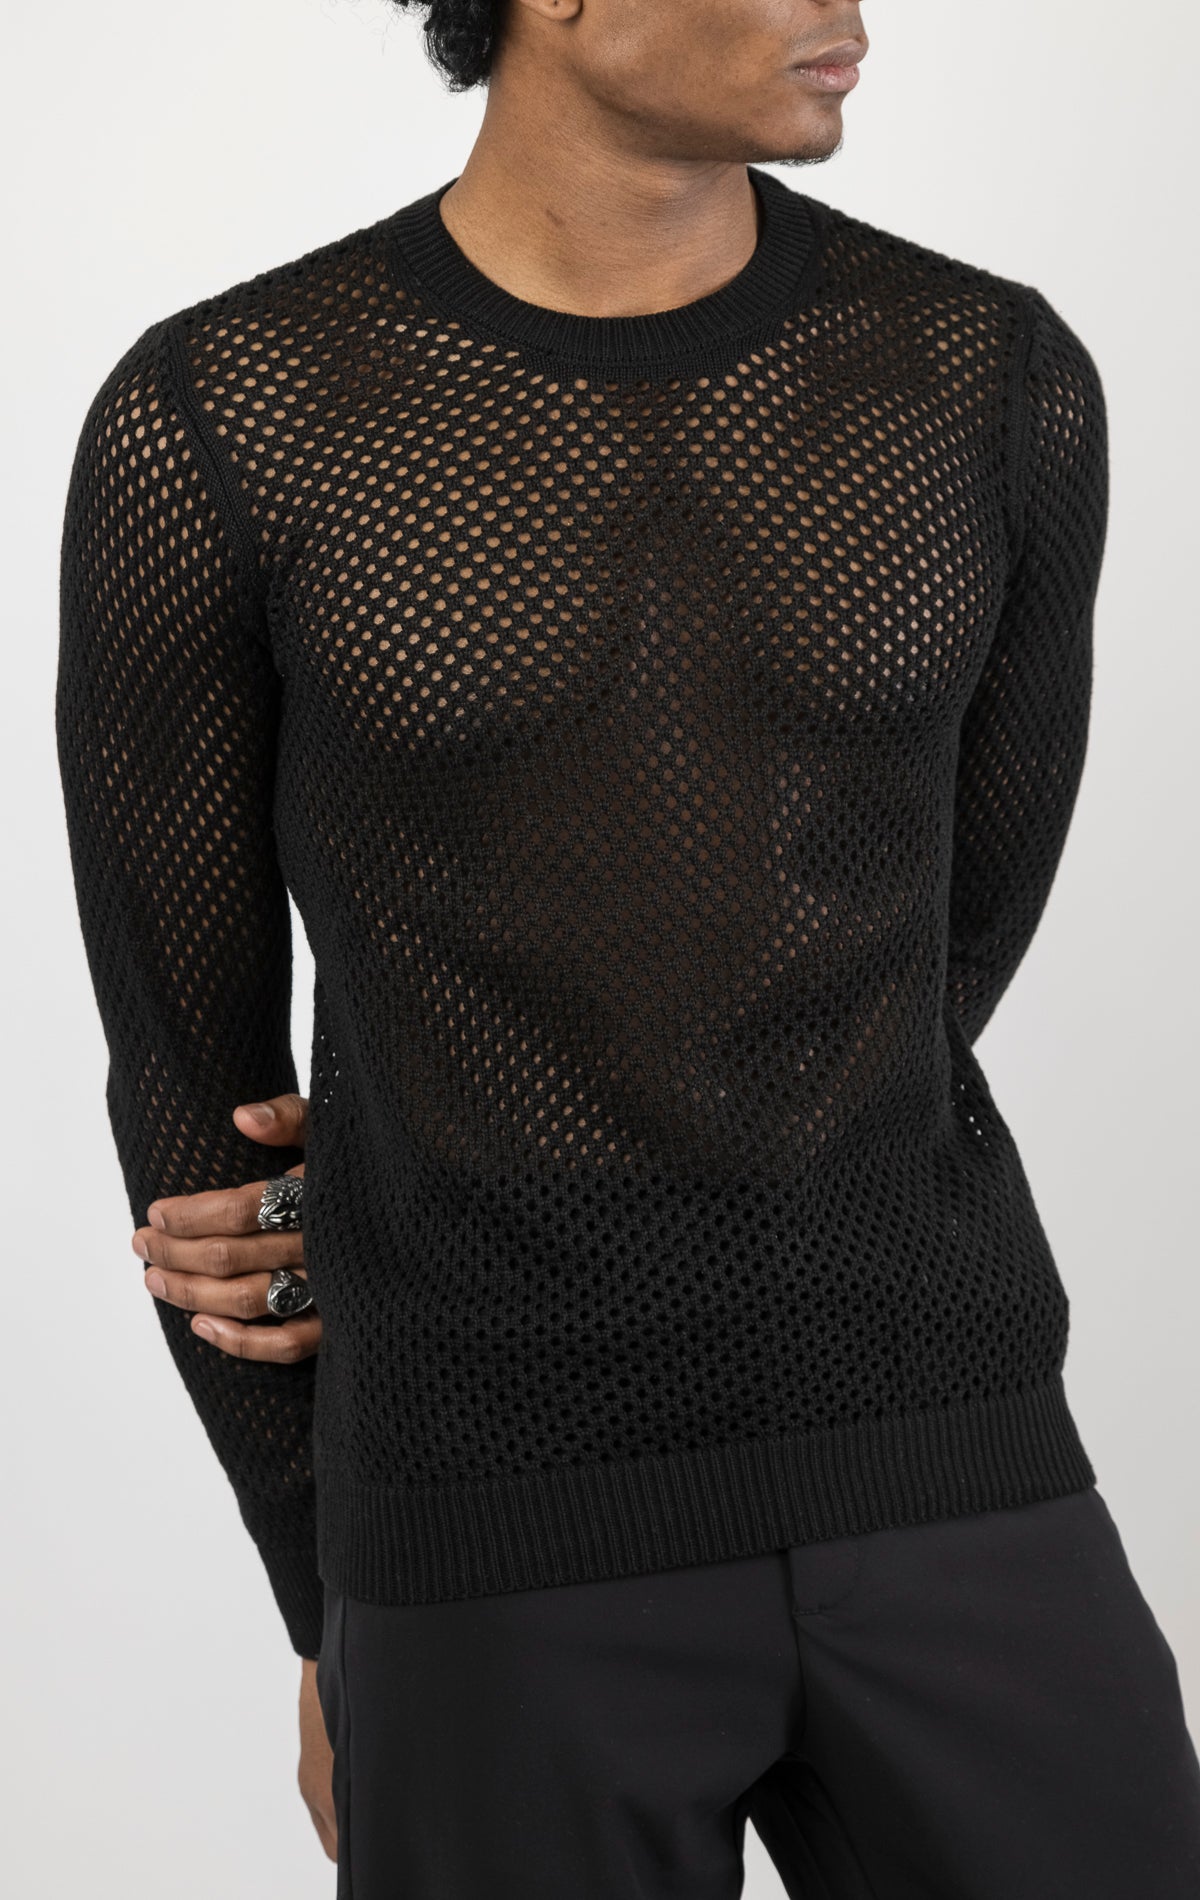 Men's see-through fishnet muscle fit shirt in black. The shirt is made from a 50% cotton, 50% acrylic blend and features a muscle fit silhouette with a see-through fishnet fabric design.